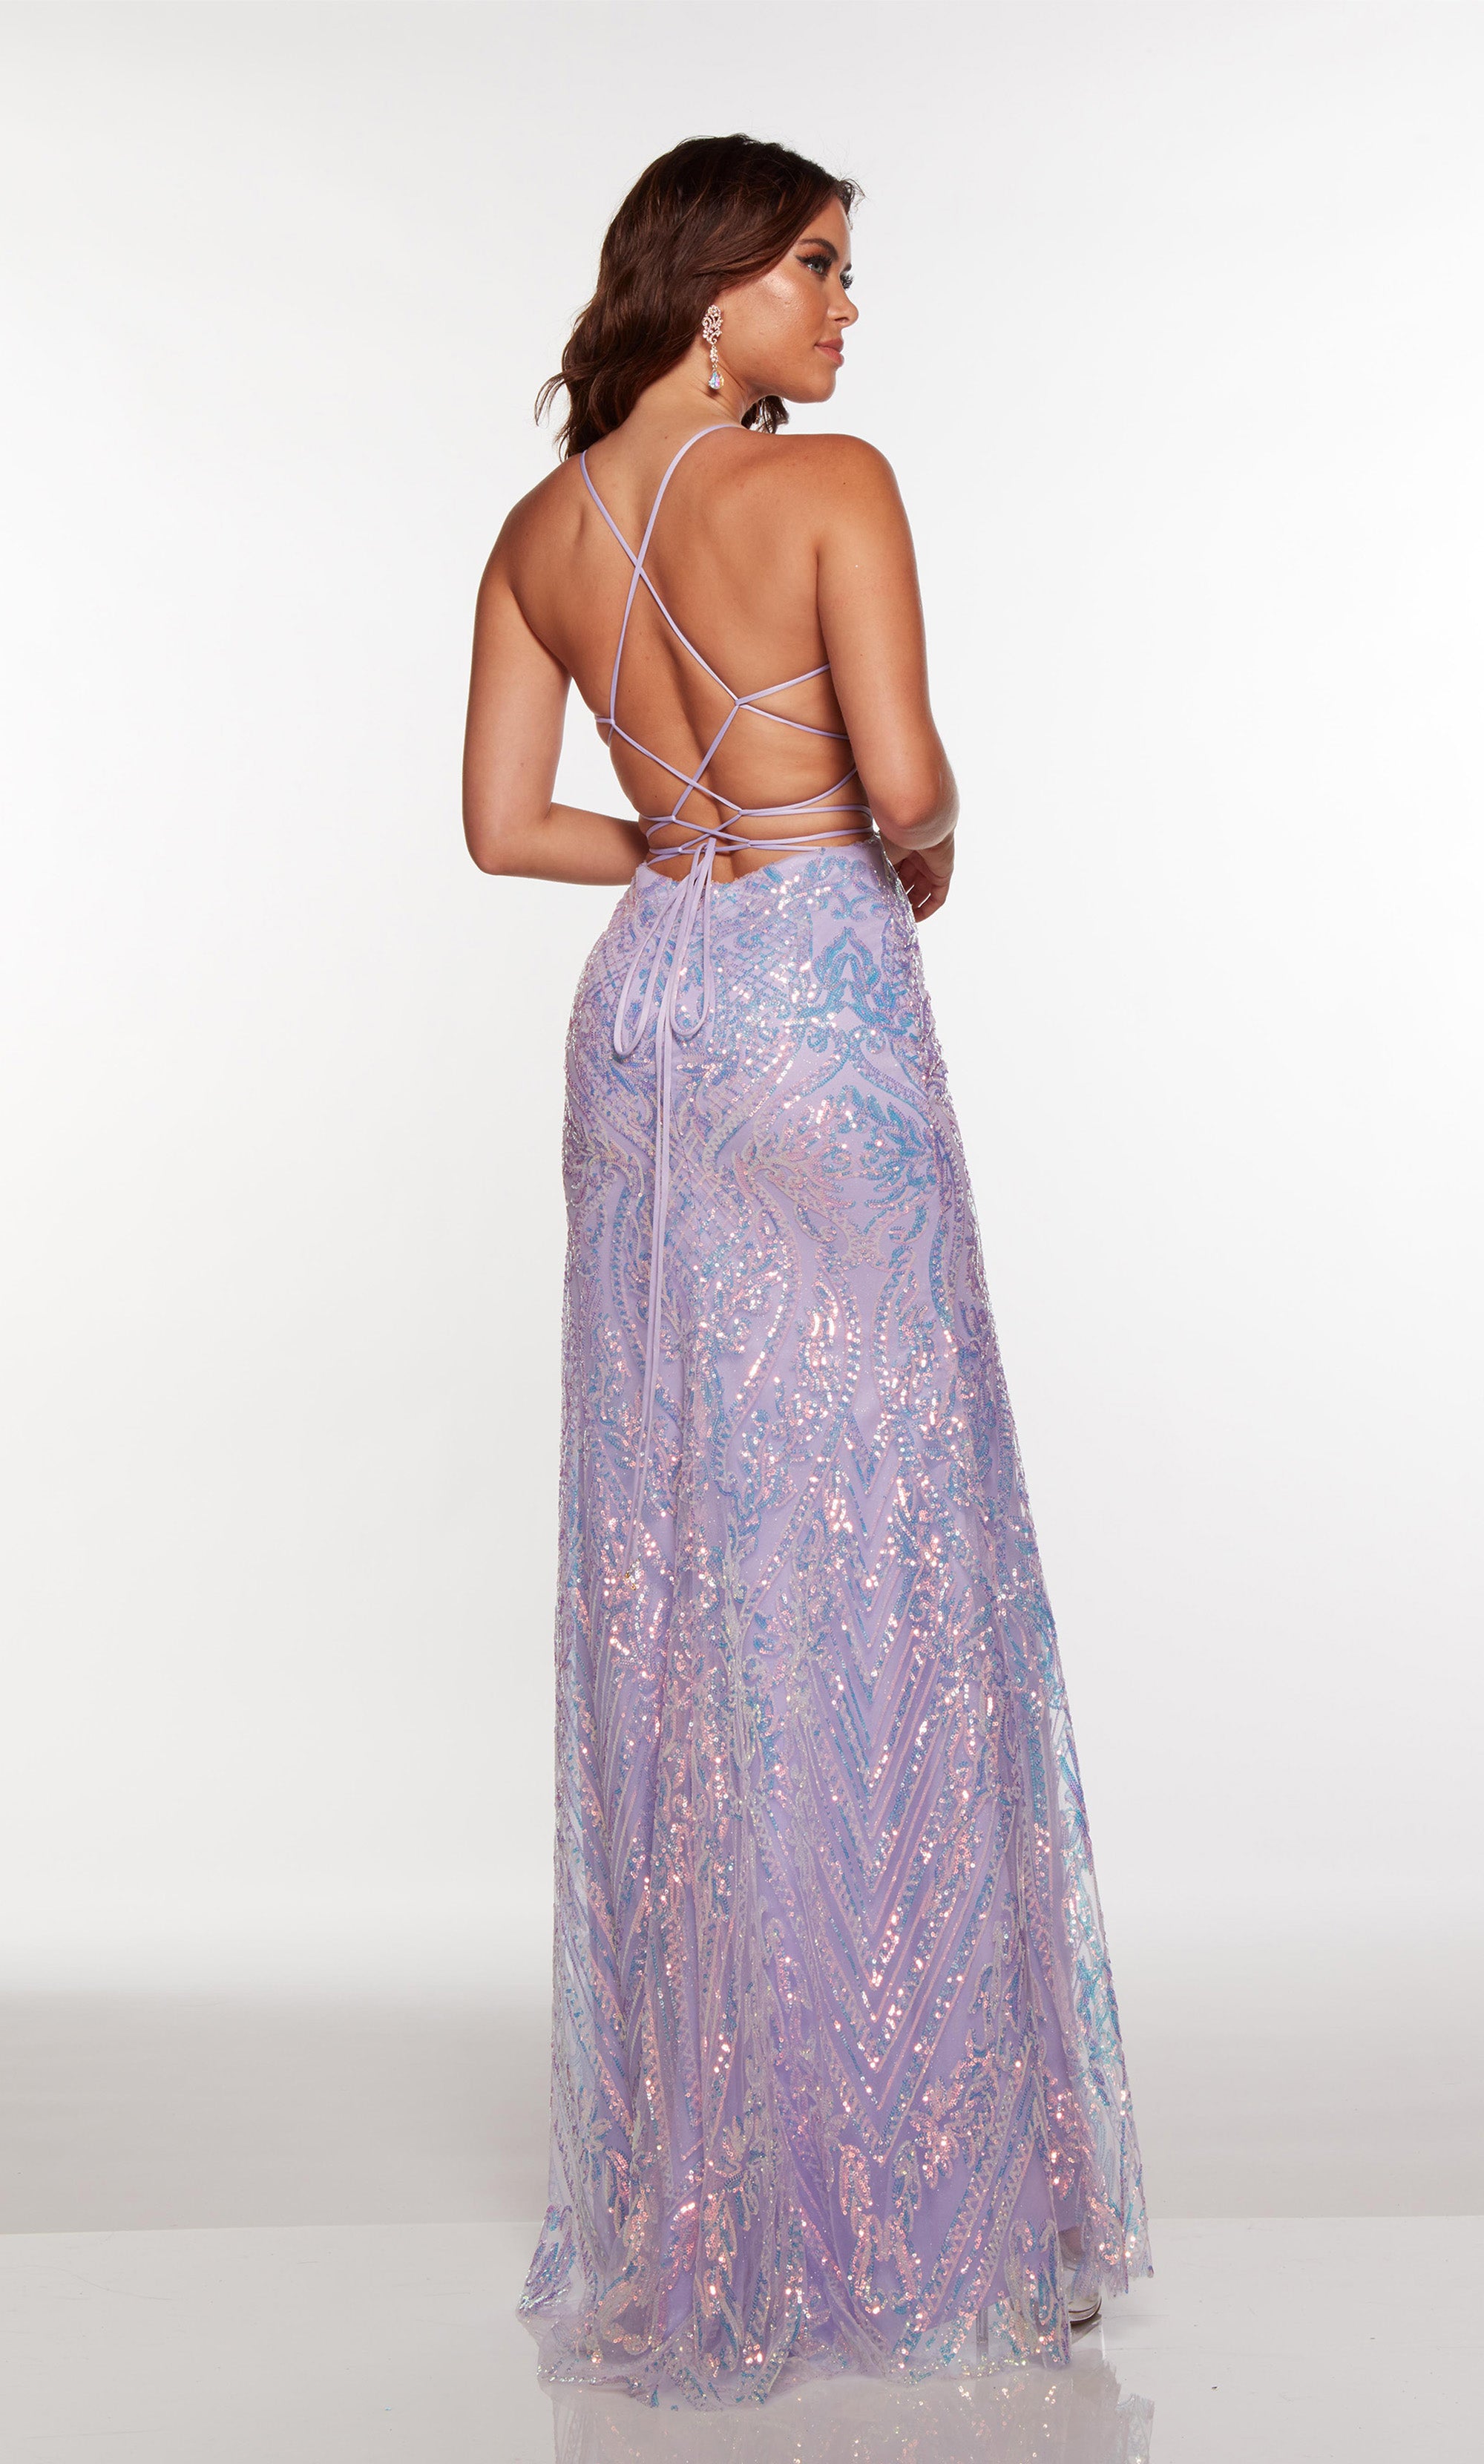 Sexy prom dress with a plunging neckline, side cutouts, and high front slit in purple iridescent sequins. COLOR-SWATCH_61403__ICEL-ILAC